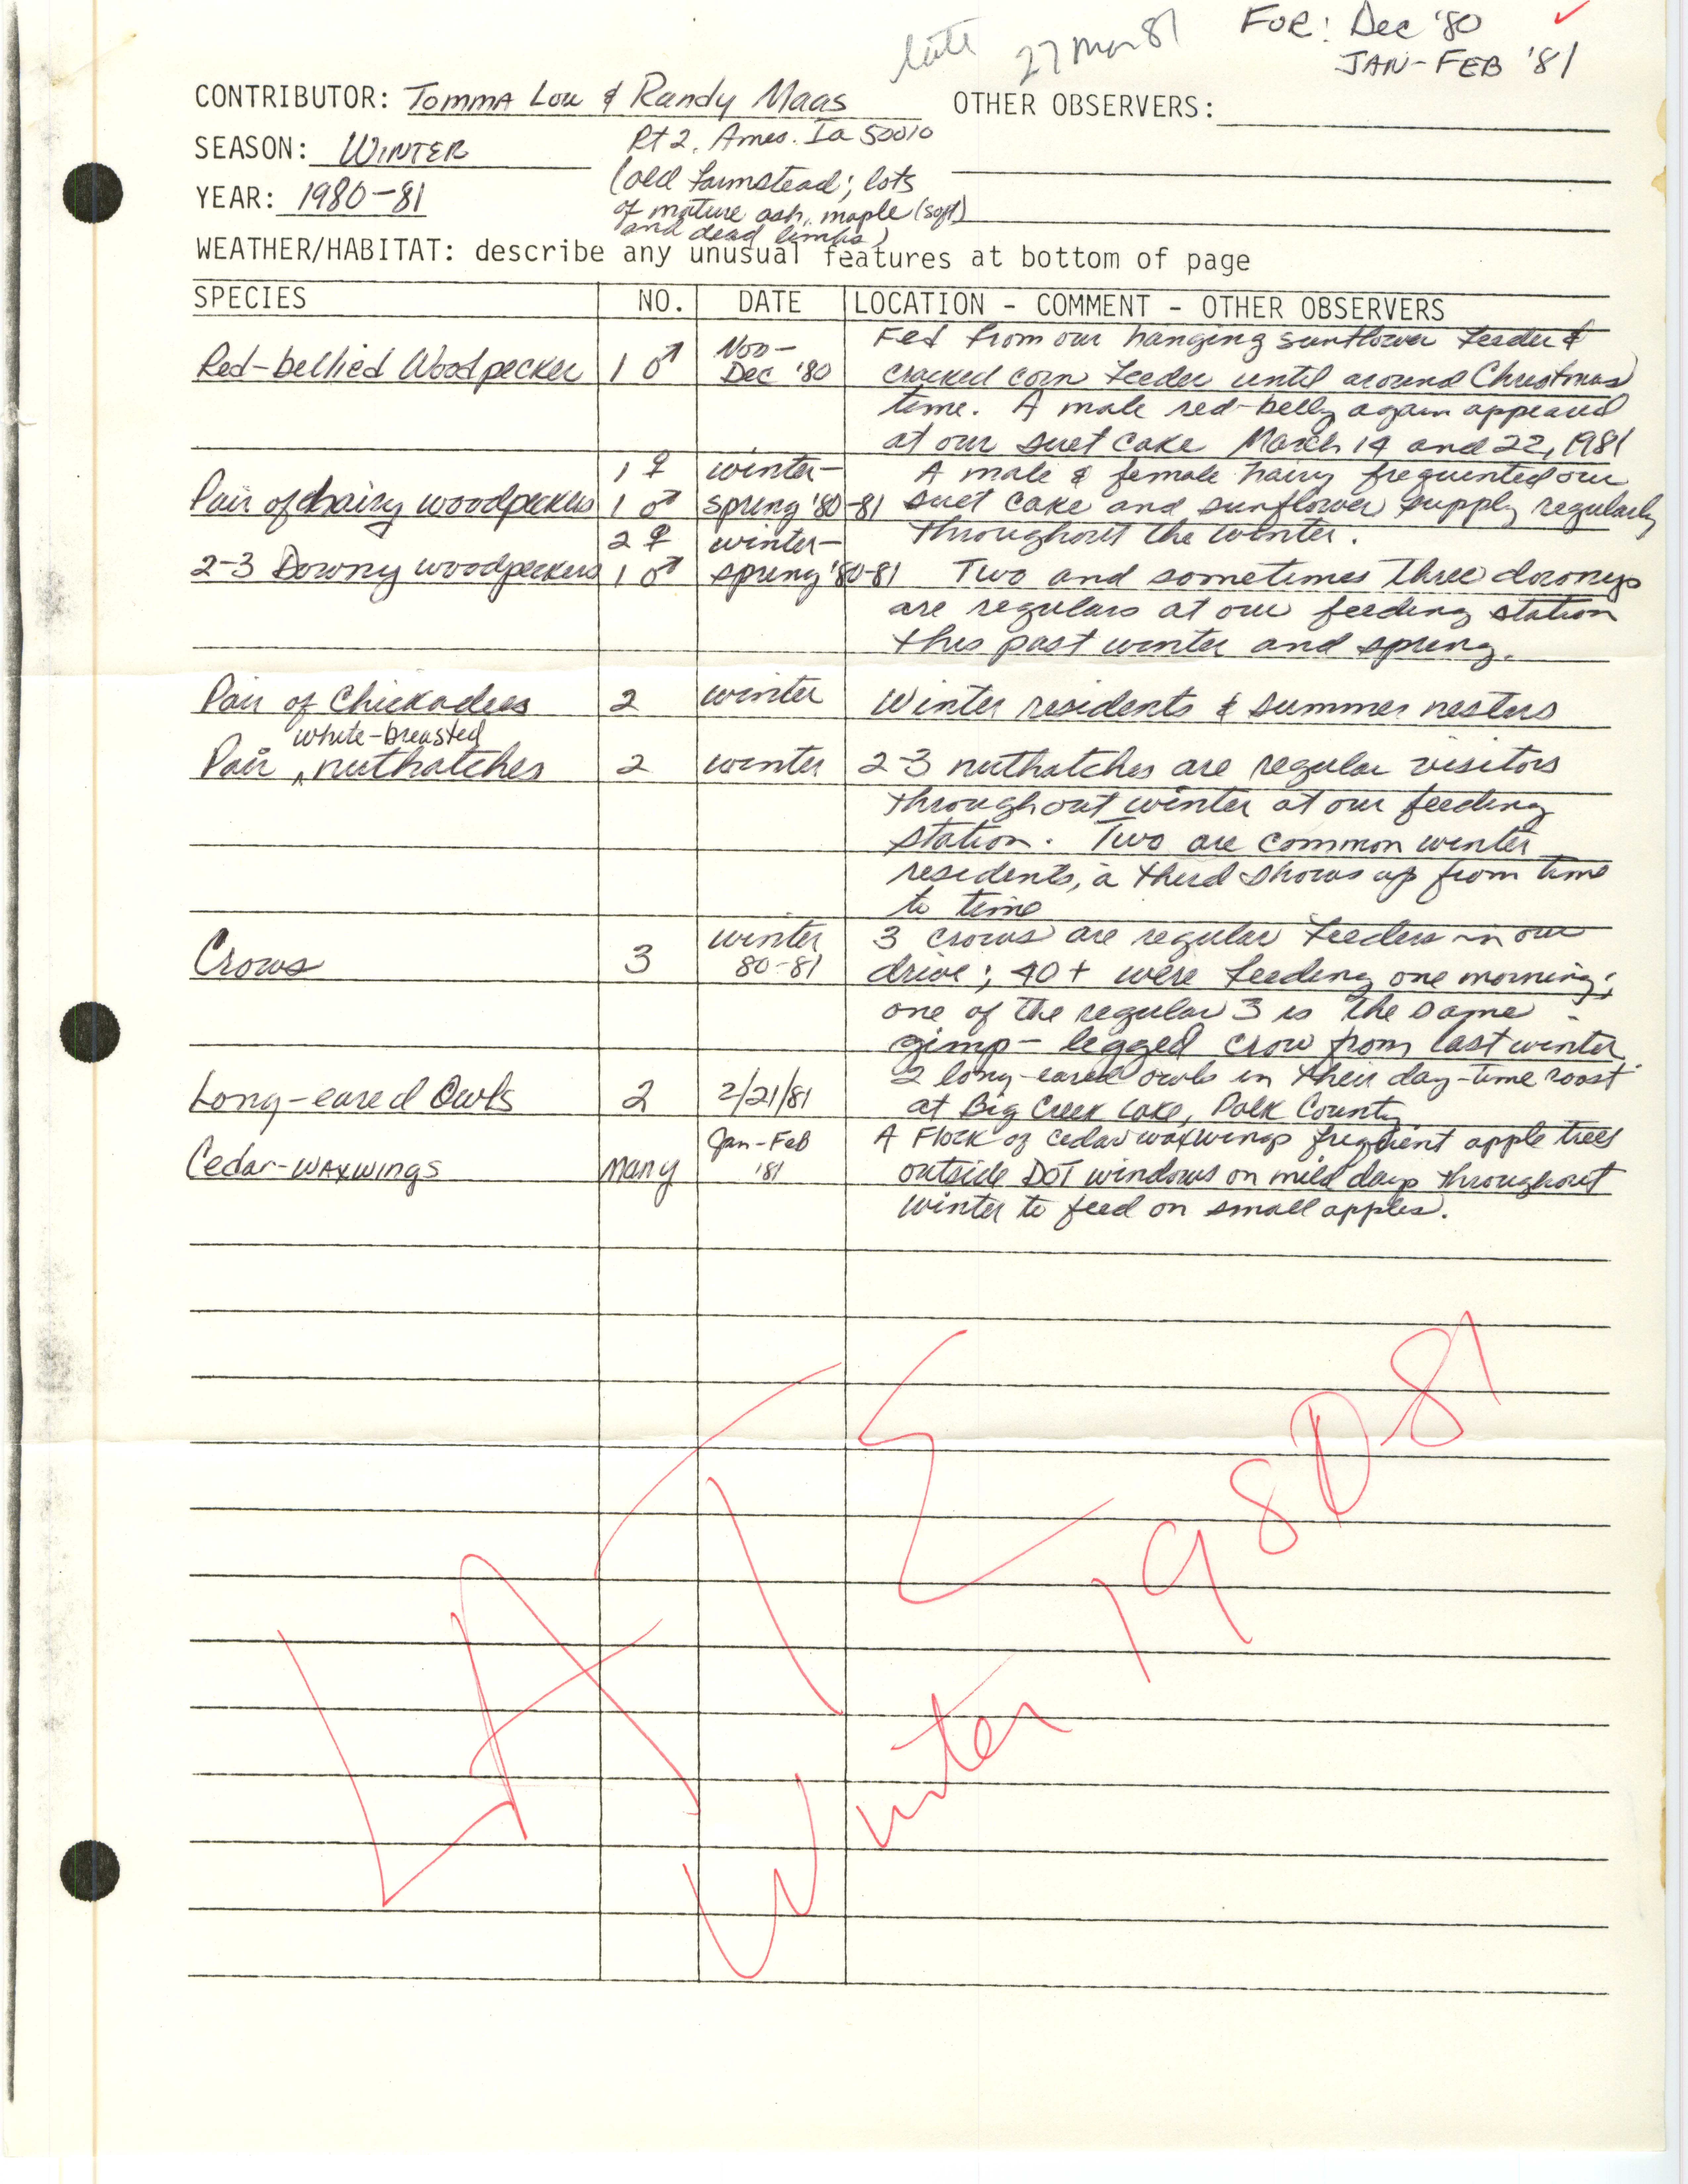 Annotated bird sighting list for winter 1980-1981 compiled by Tomma Lou and Randy Maas